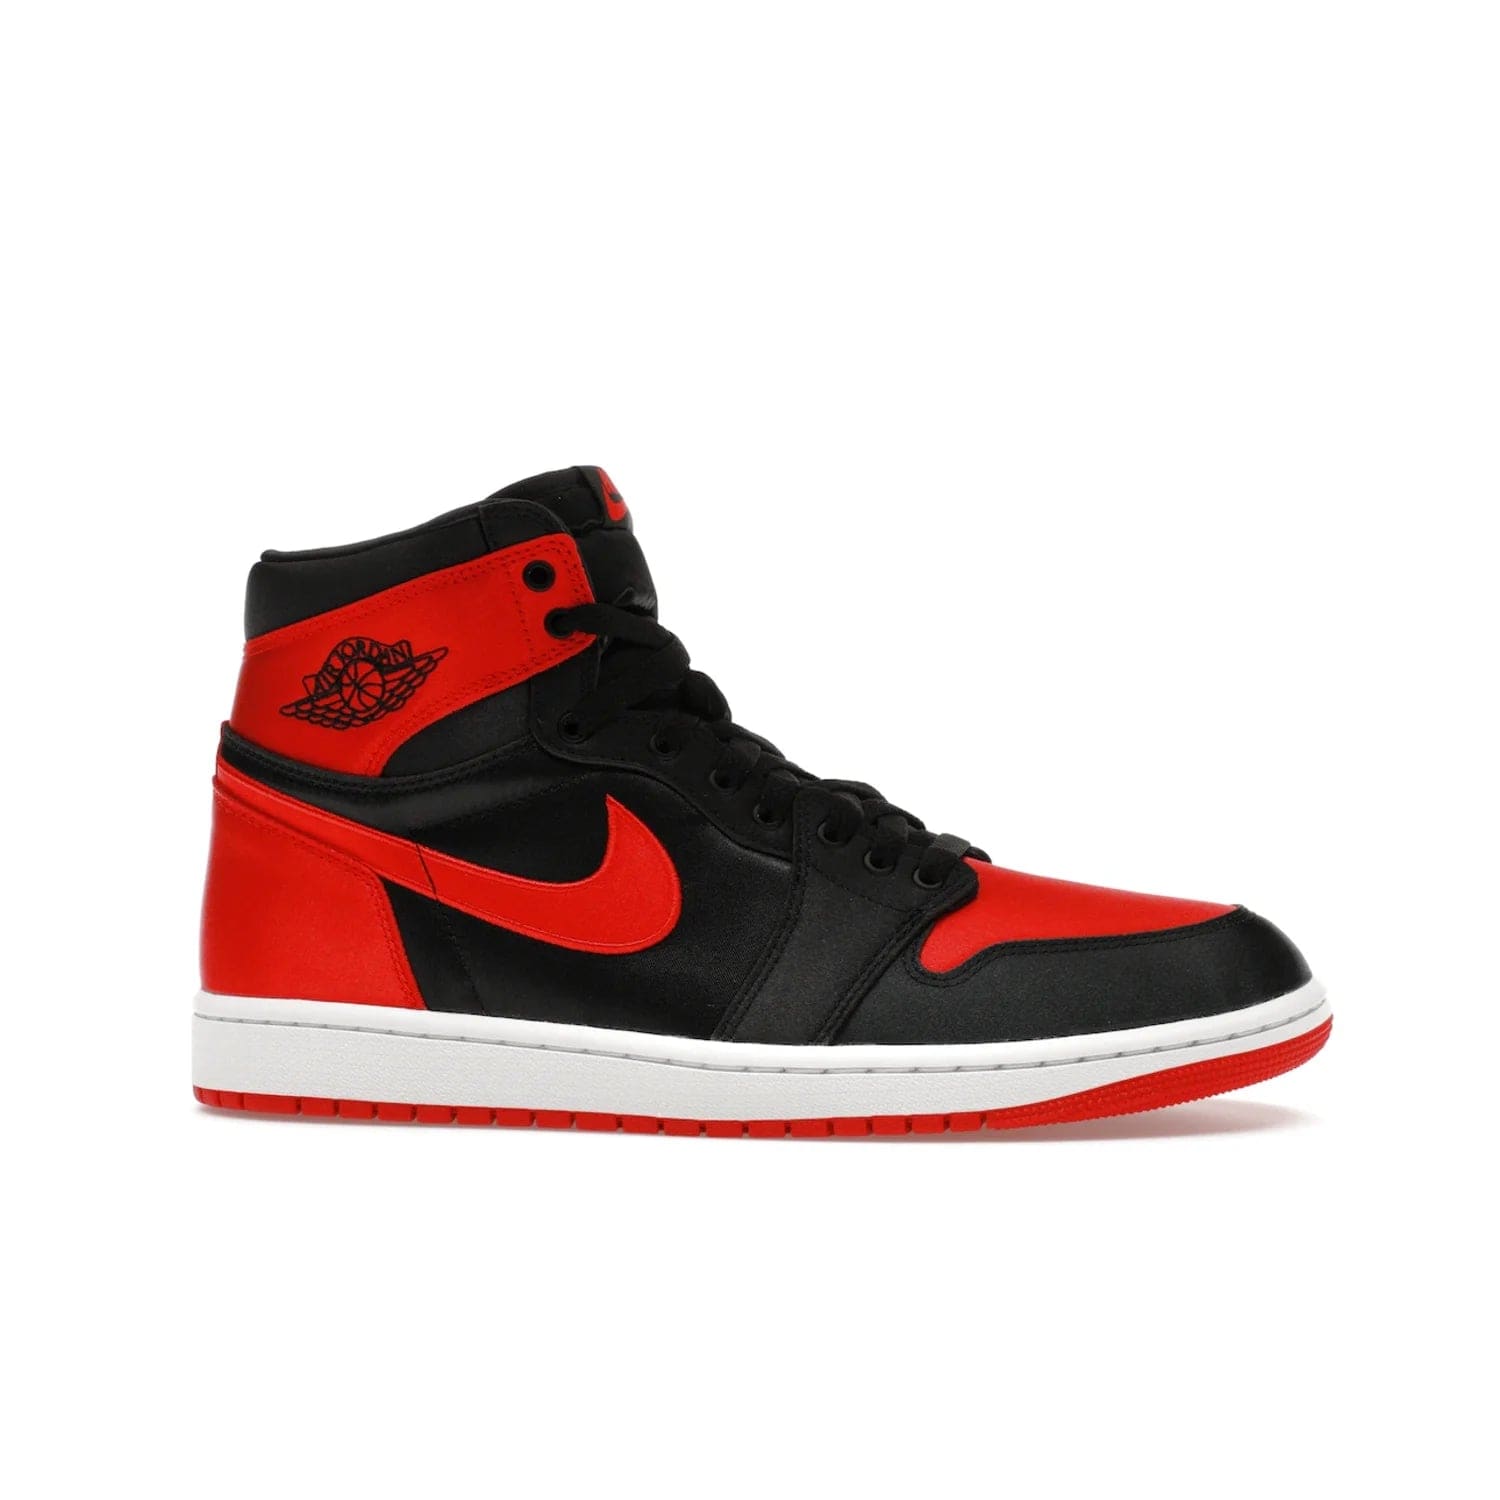 Jordan 1 Retro High OG Satin Bred (Women's) - Image 2 - Only at www.BallersClubKickz.com - Introducing the Jordan 1 Retro High OG Satin Bred (Women's). Luxe satin finish, contrasting hues & classic accents. Trending sneakers symbolizing timelessness & heritage. Make a bold statement with this iconic shoe. Available October 4, 2023.